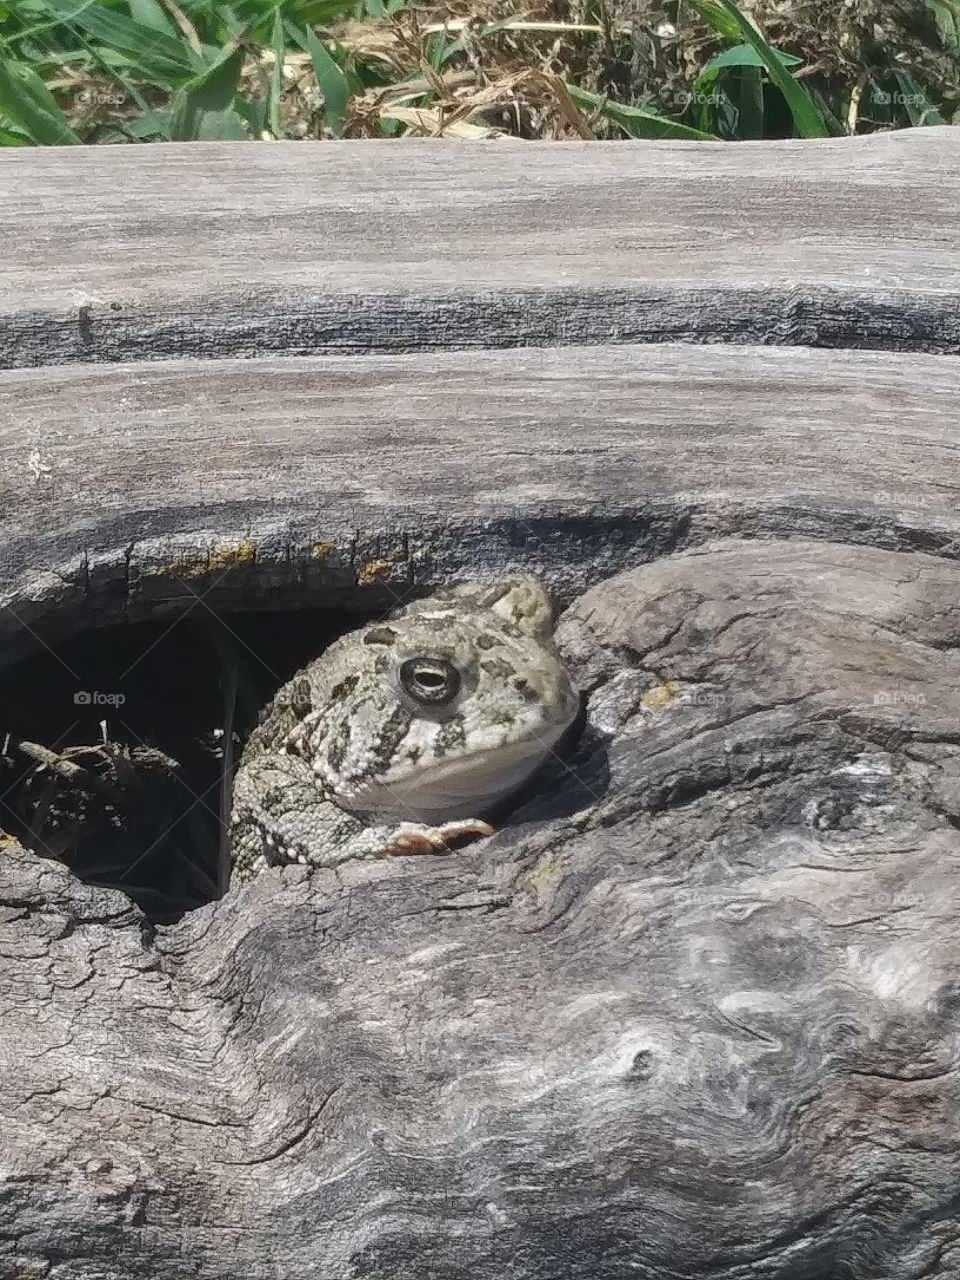 frog in a log